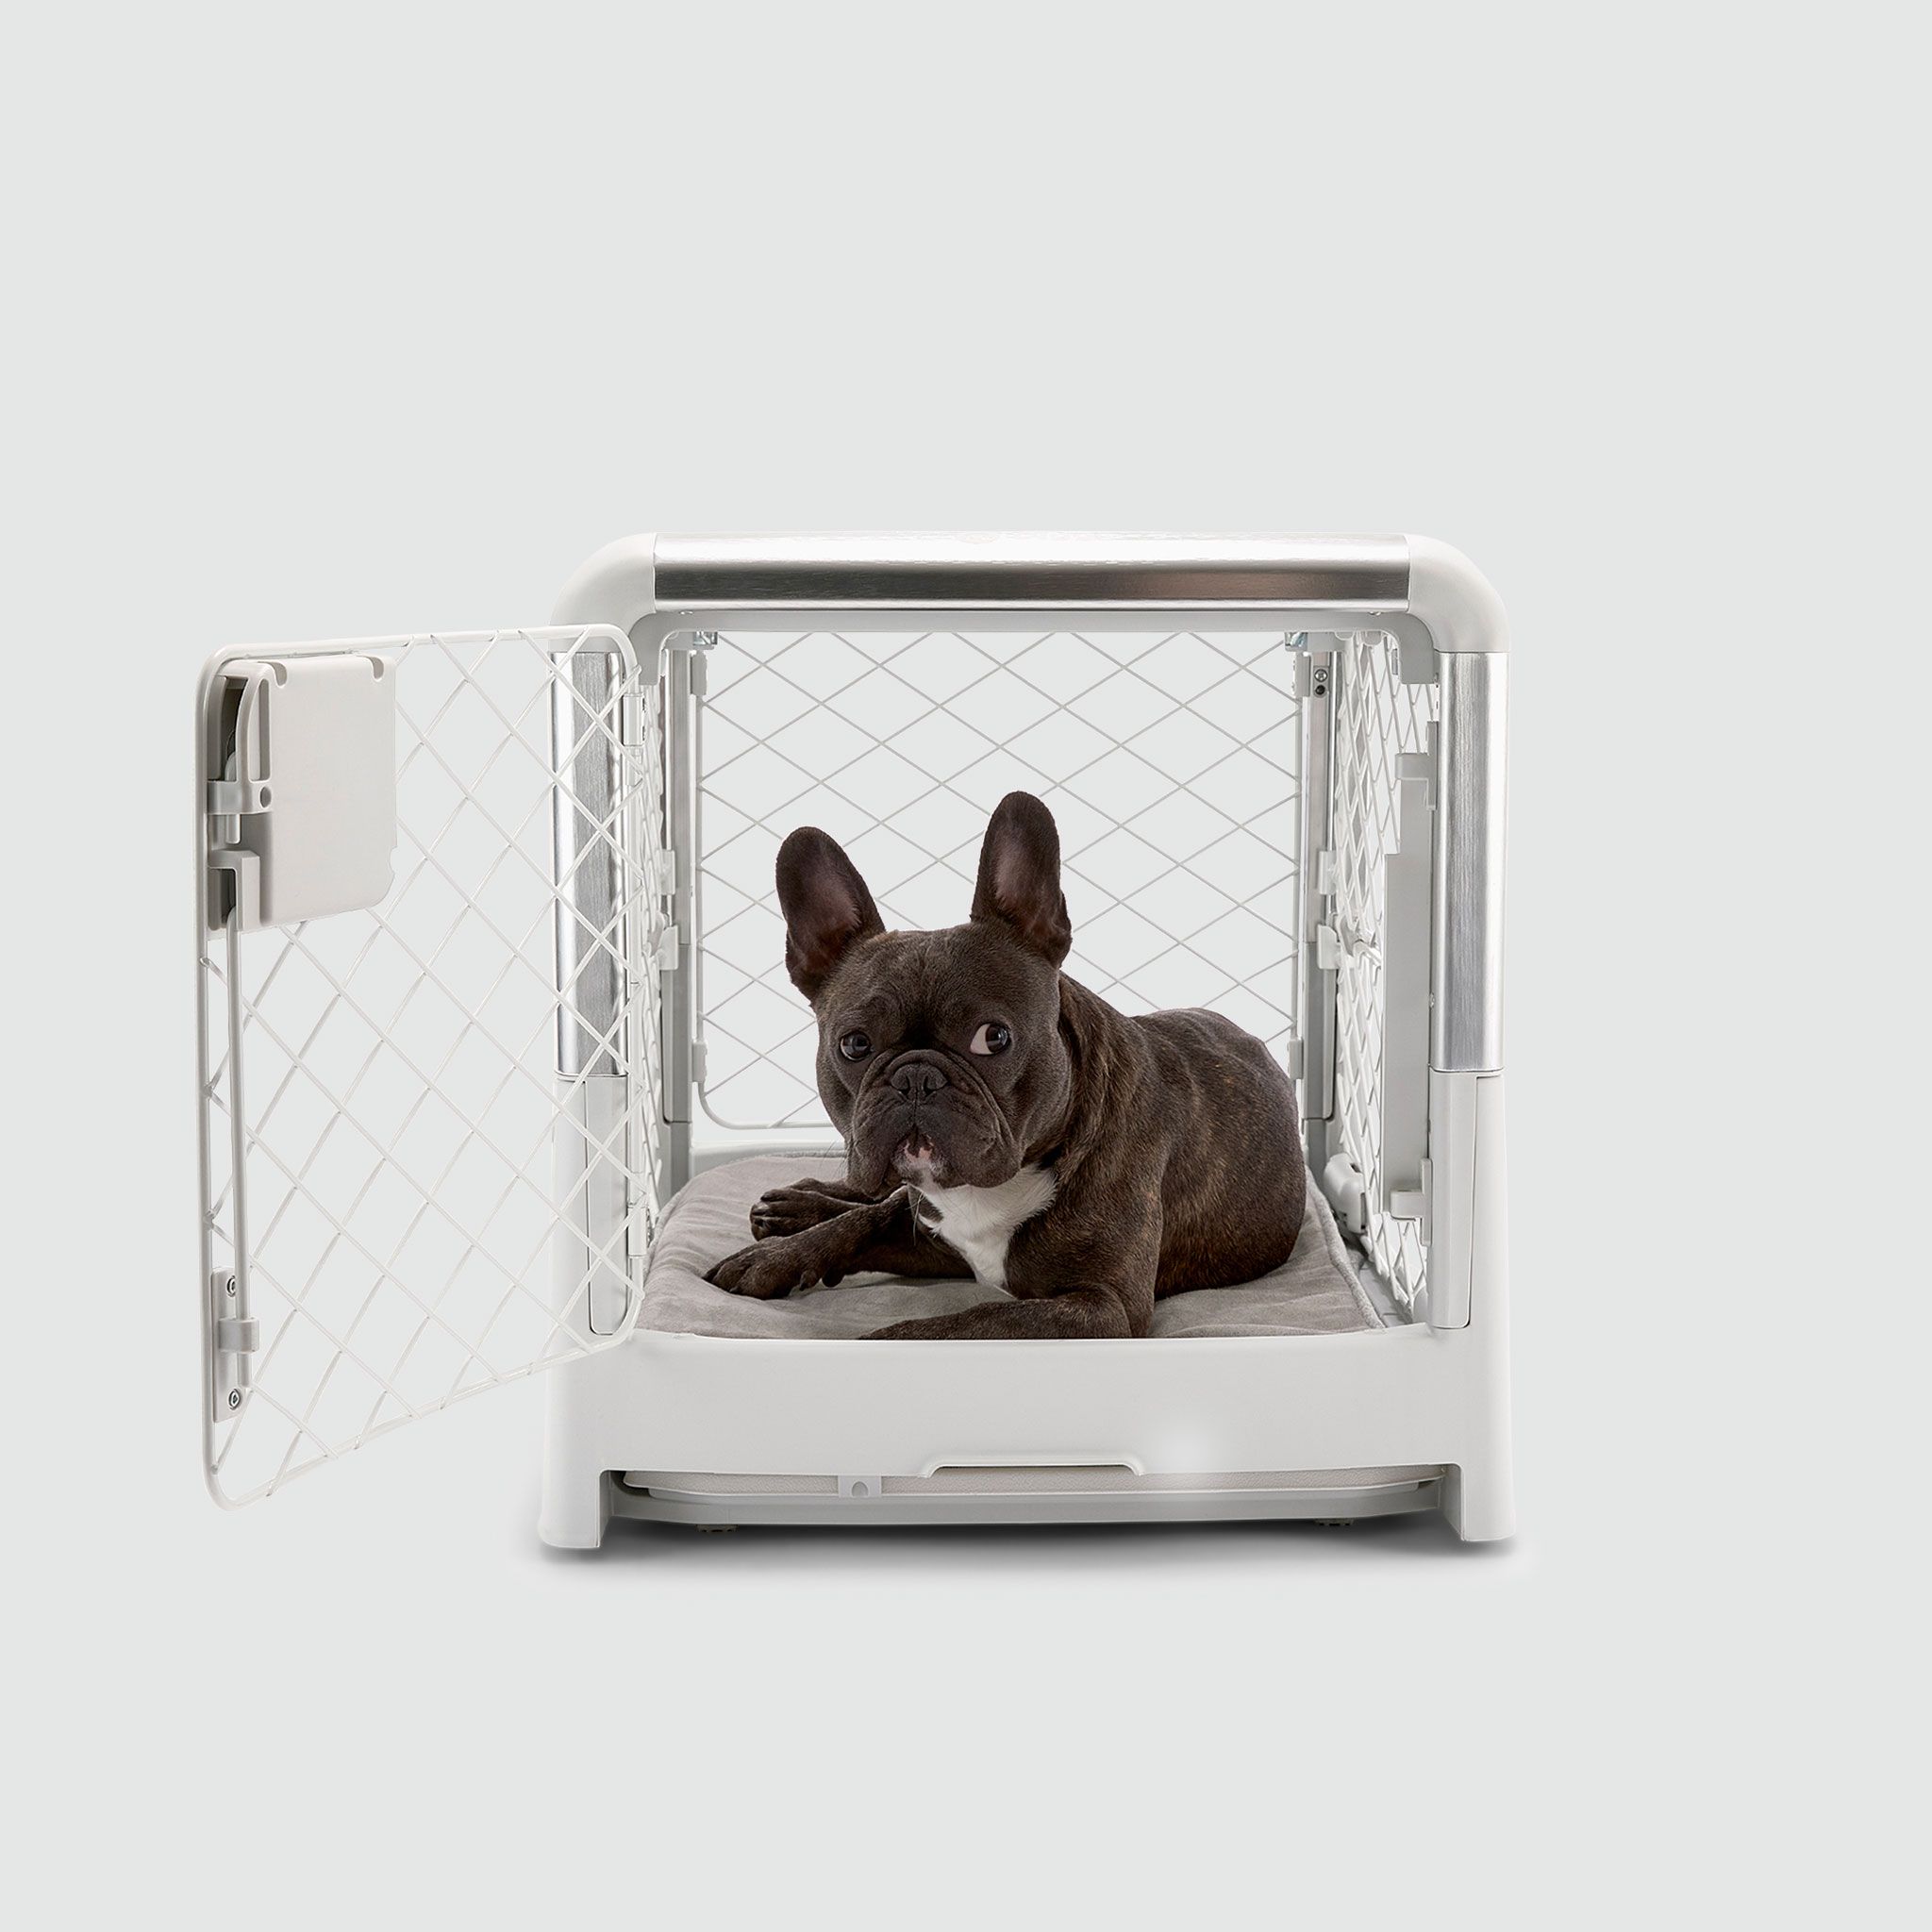 Essential Puppy Crate Training Products